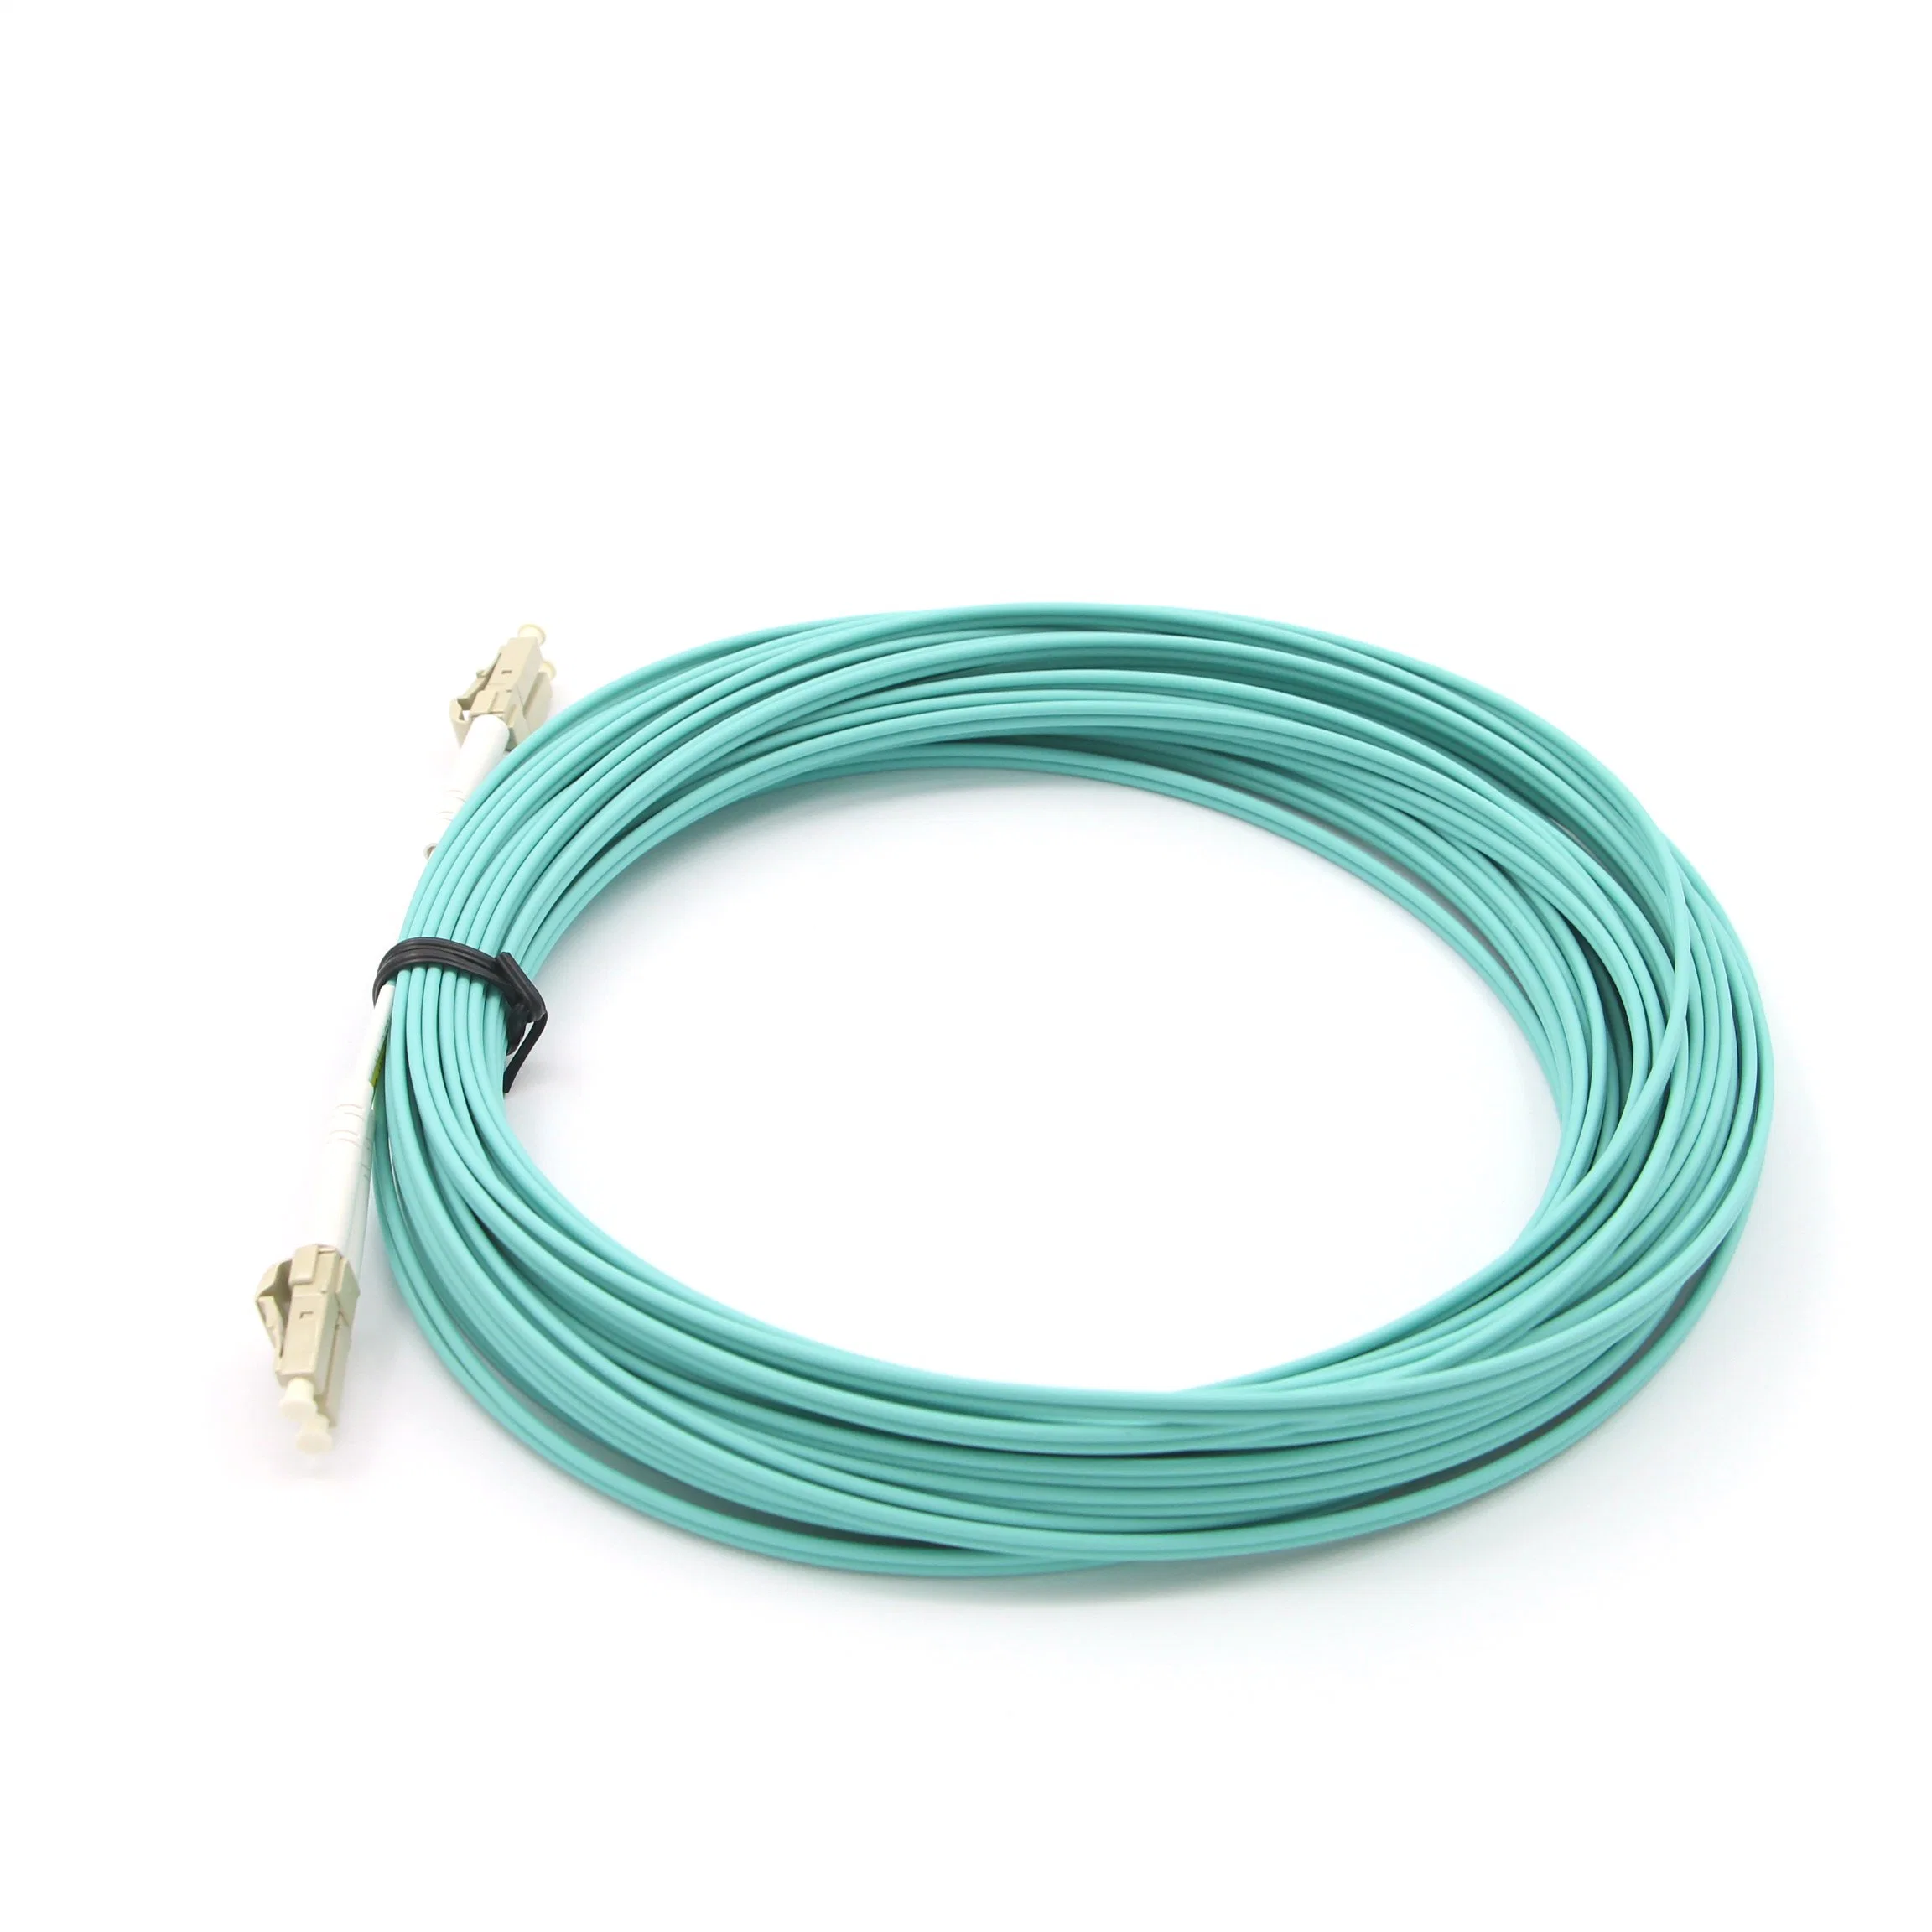 LC-LC Om3 Duplex 1.8mm Fiber Optics Patch Cord with 13 Meters